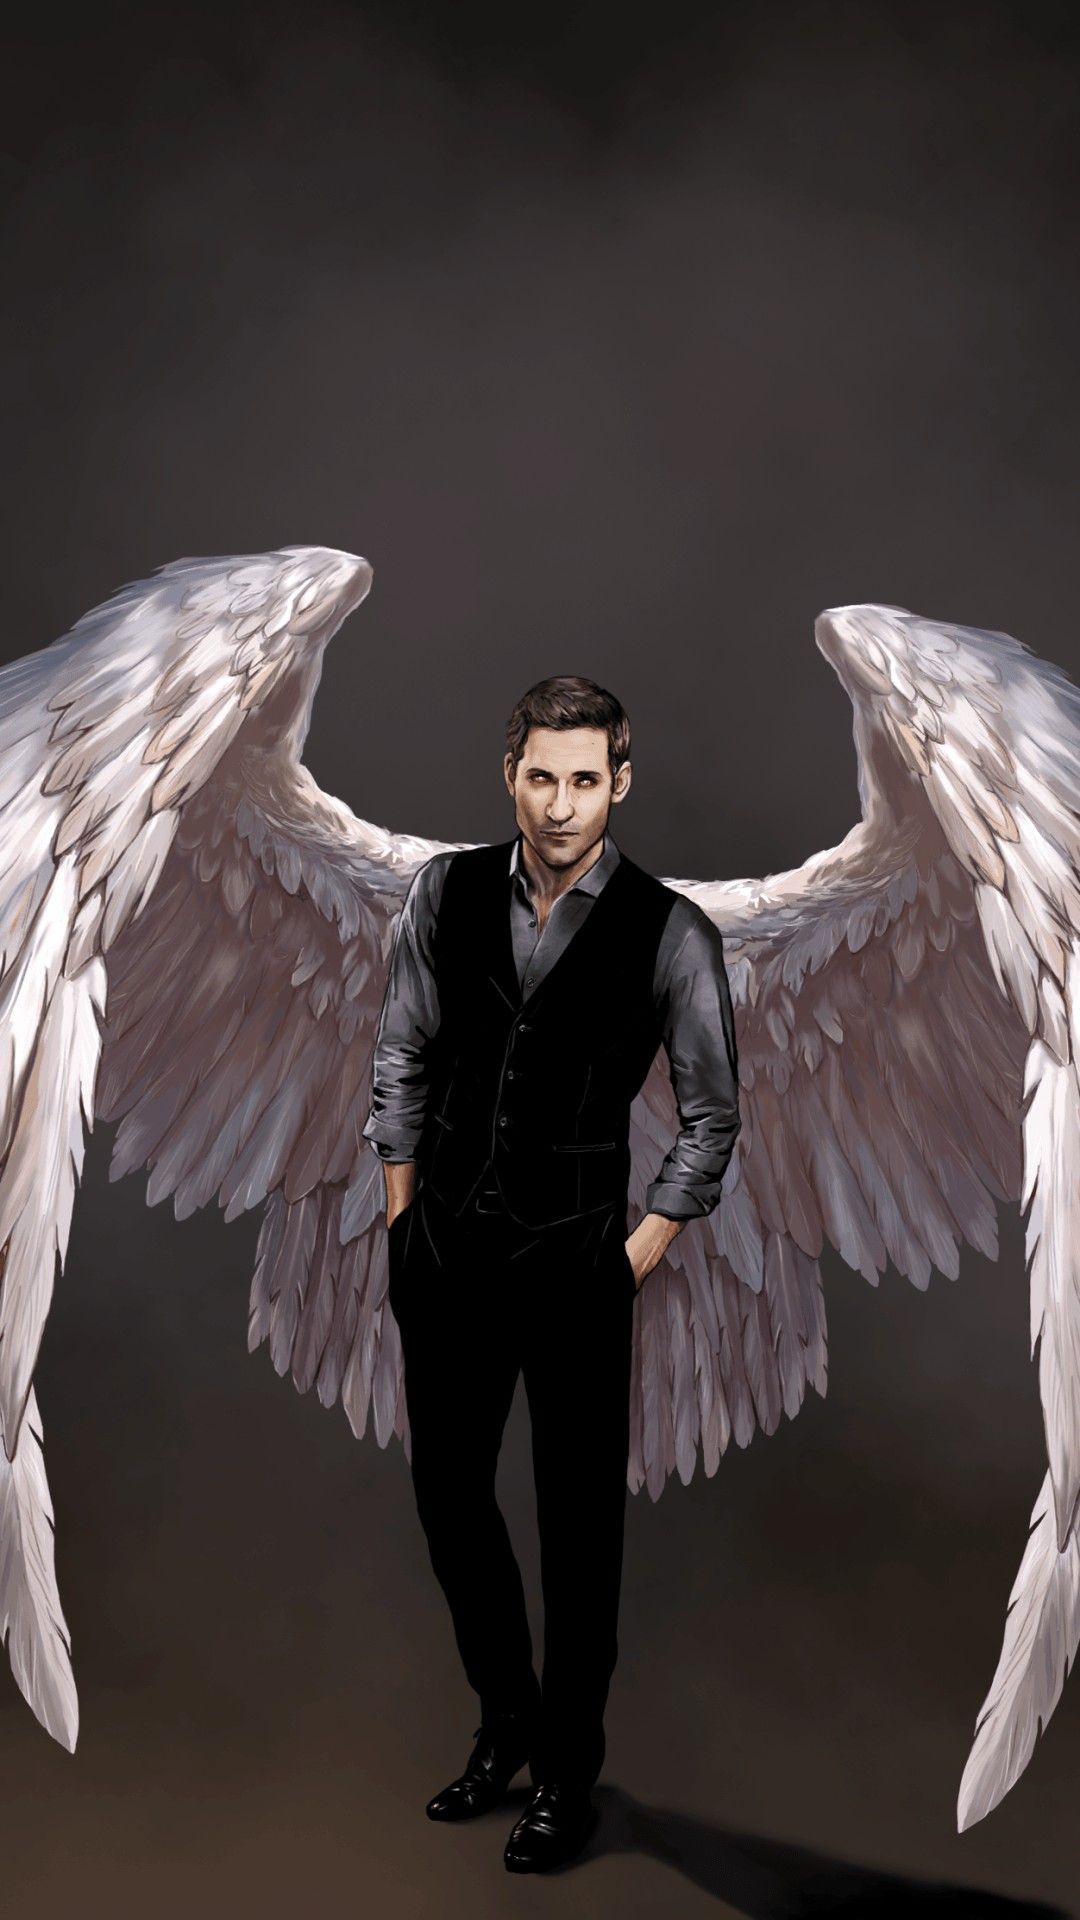 Lucifer with angel wings art. Lucifer, Lucifer characters, Lucifer morningstar